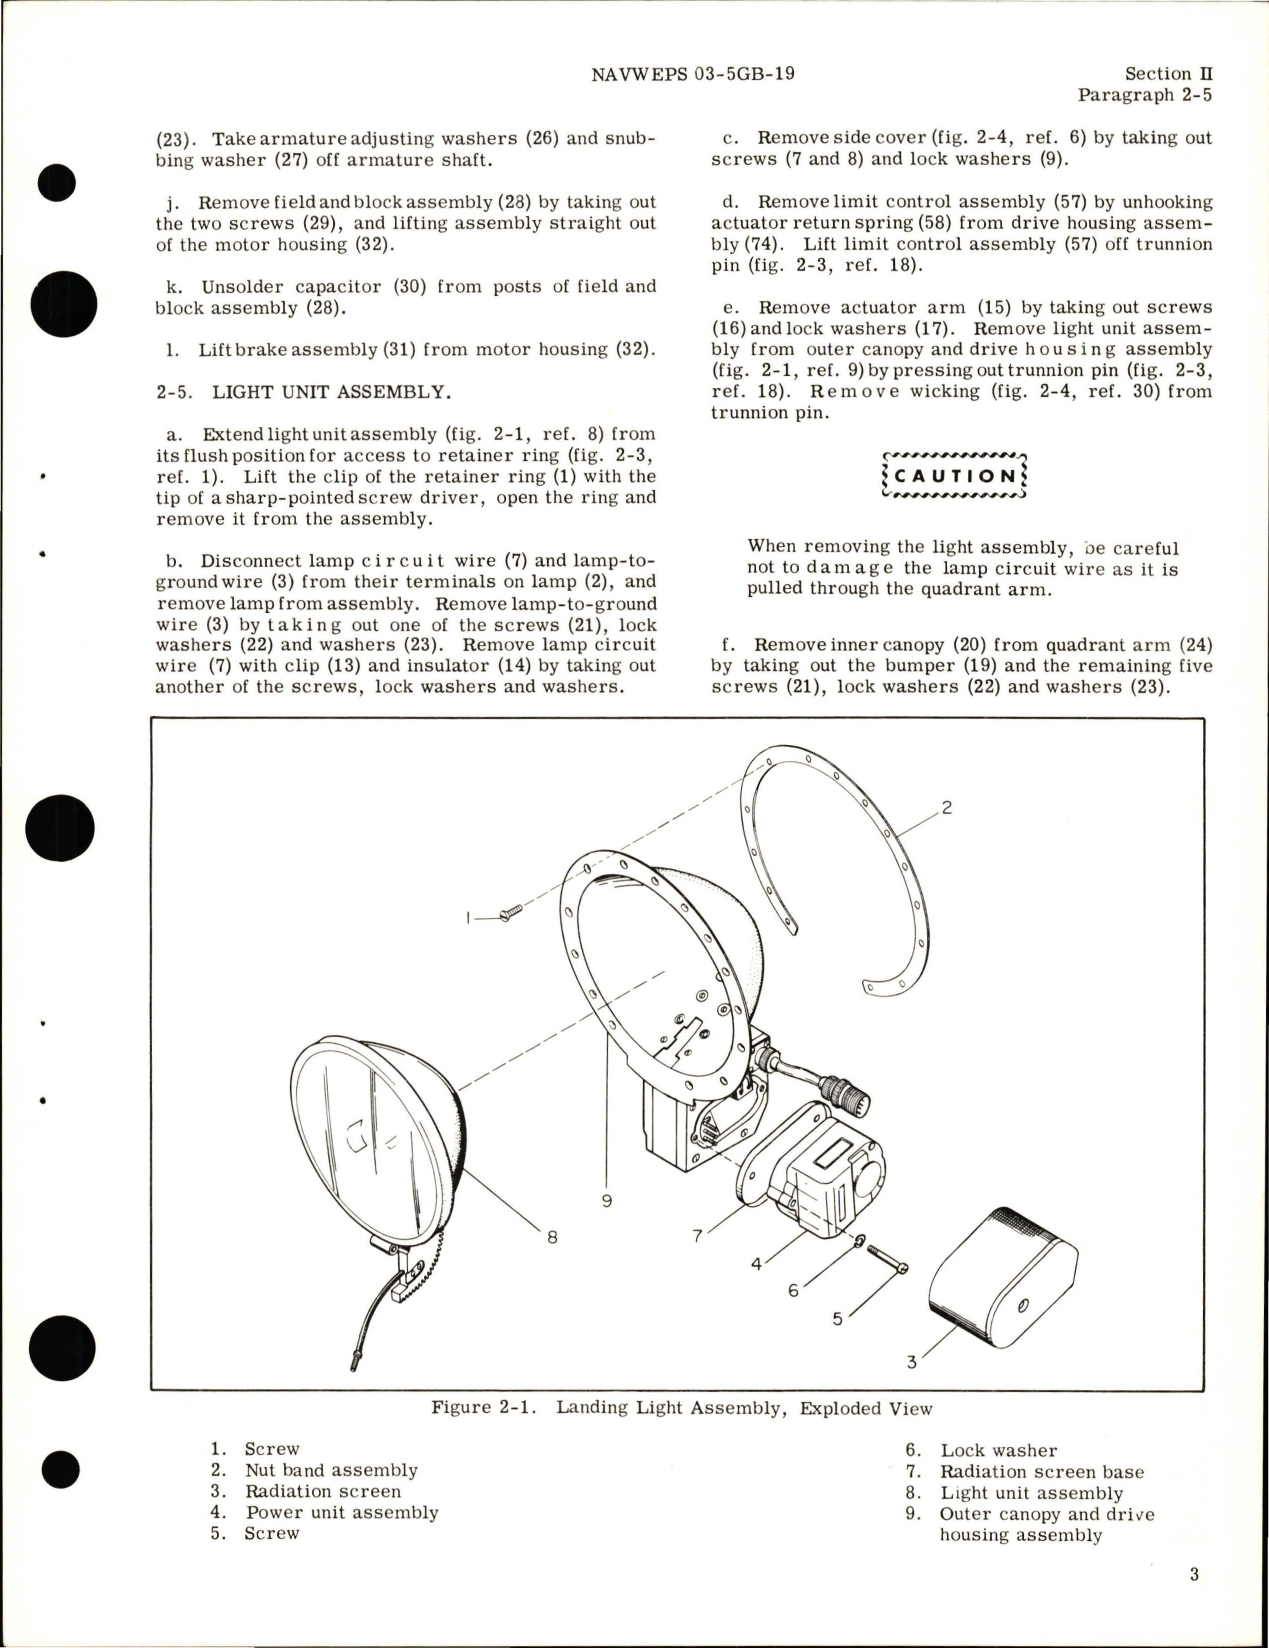 Sample page 7 from AirCorps Library document: Overhaul Instructions for Electrically Retractable Landing Light Assembly 